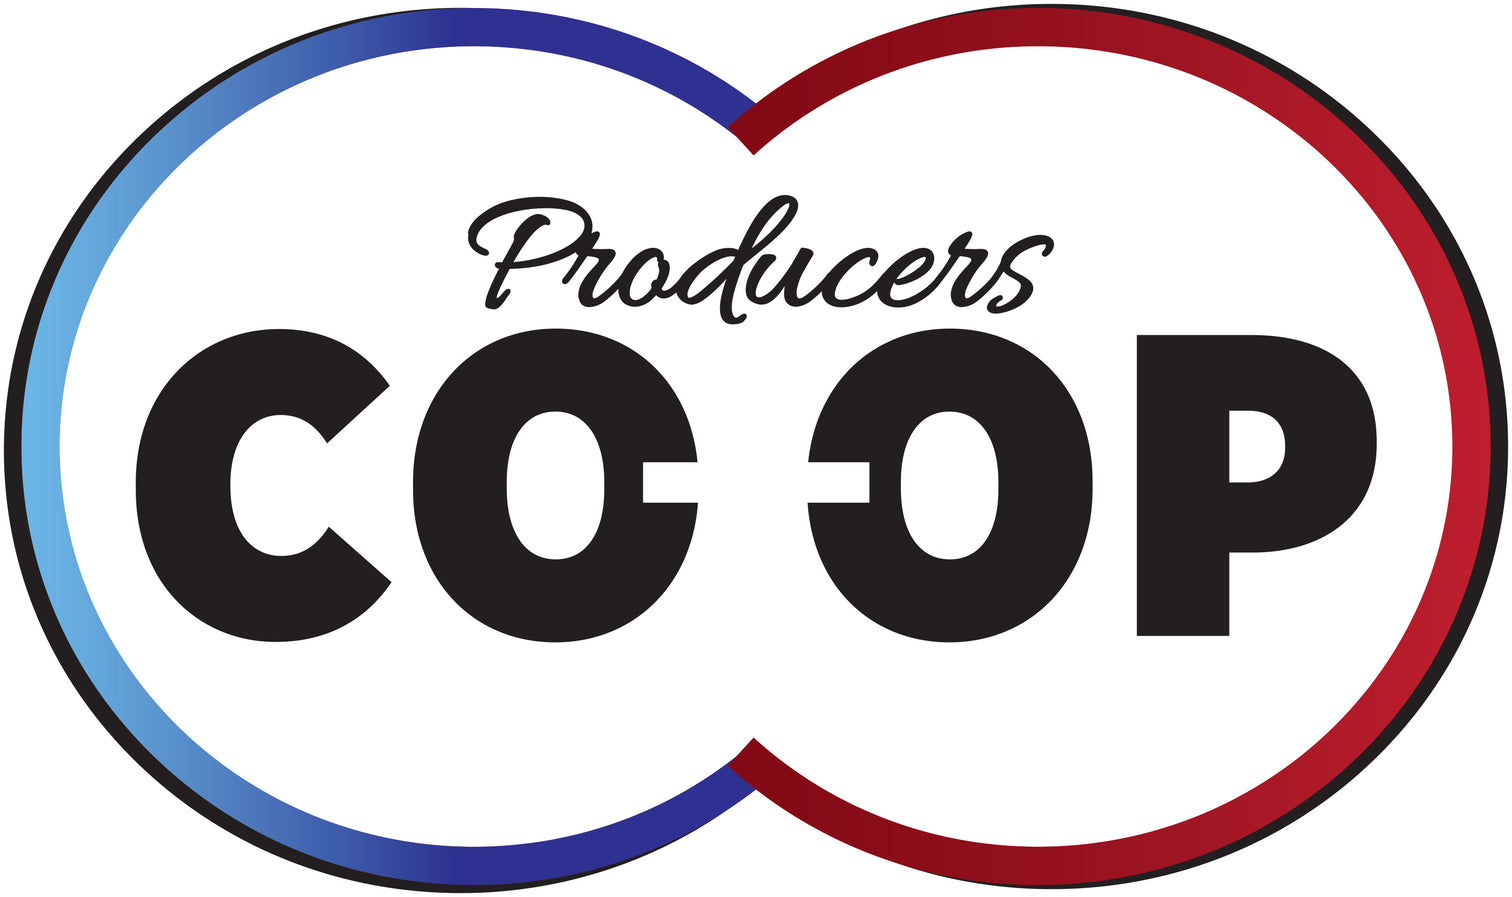 Producers Co-op country store - New Braunfels - New Braunfels, TX ...